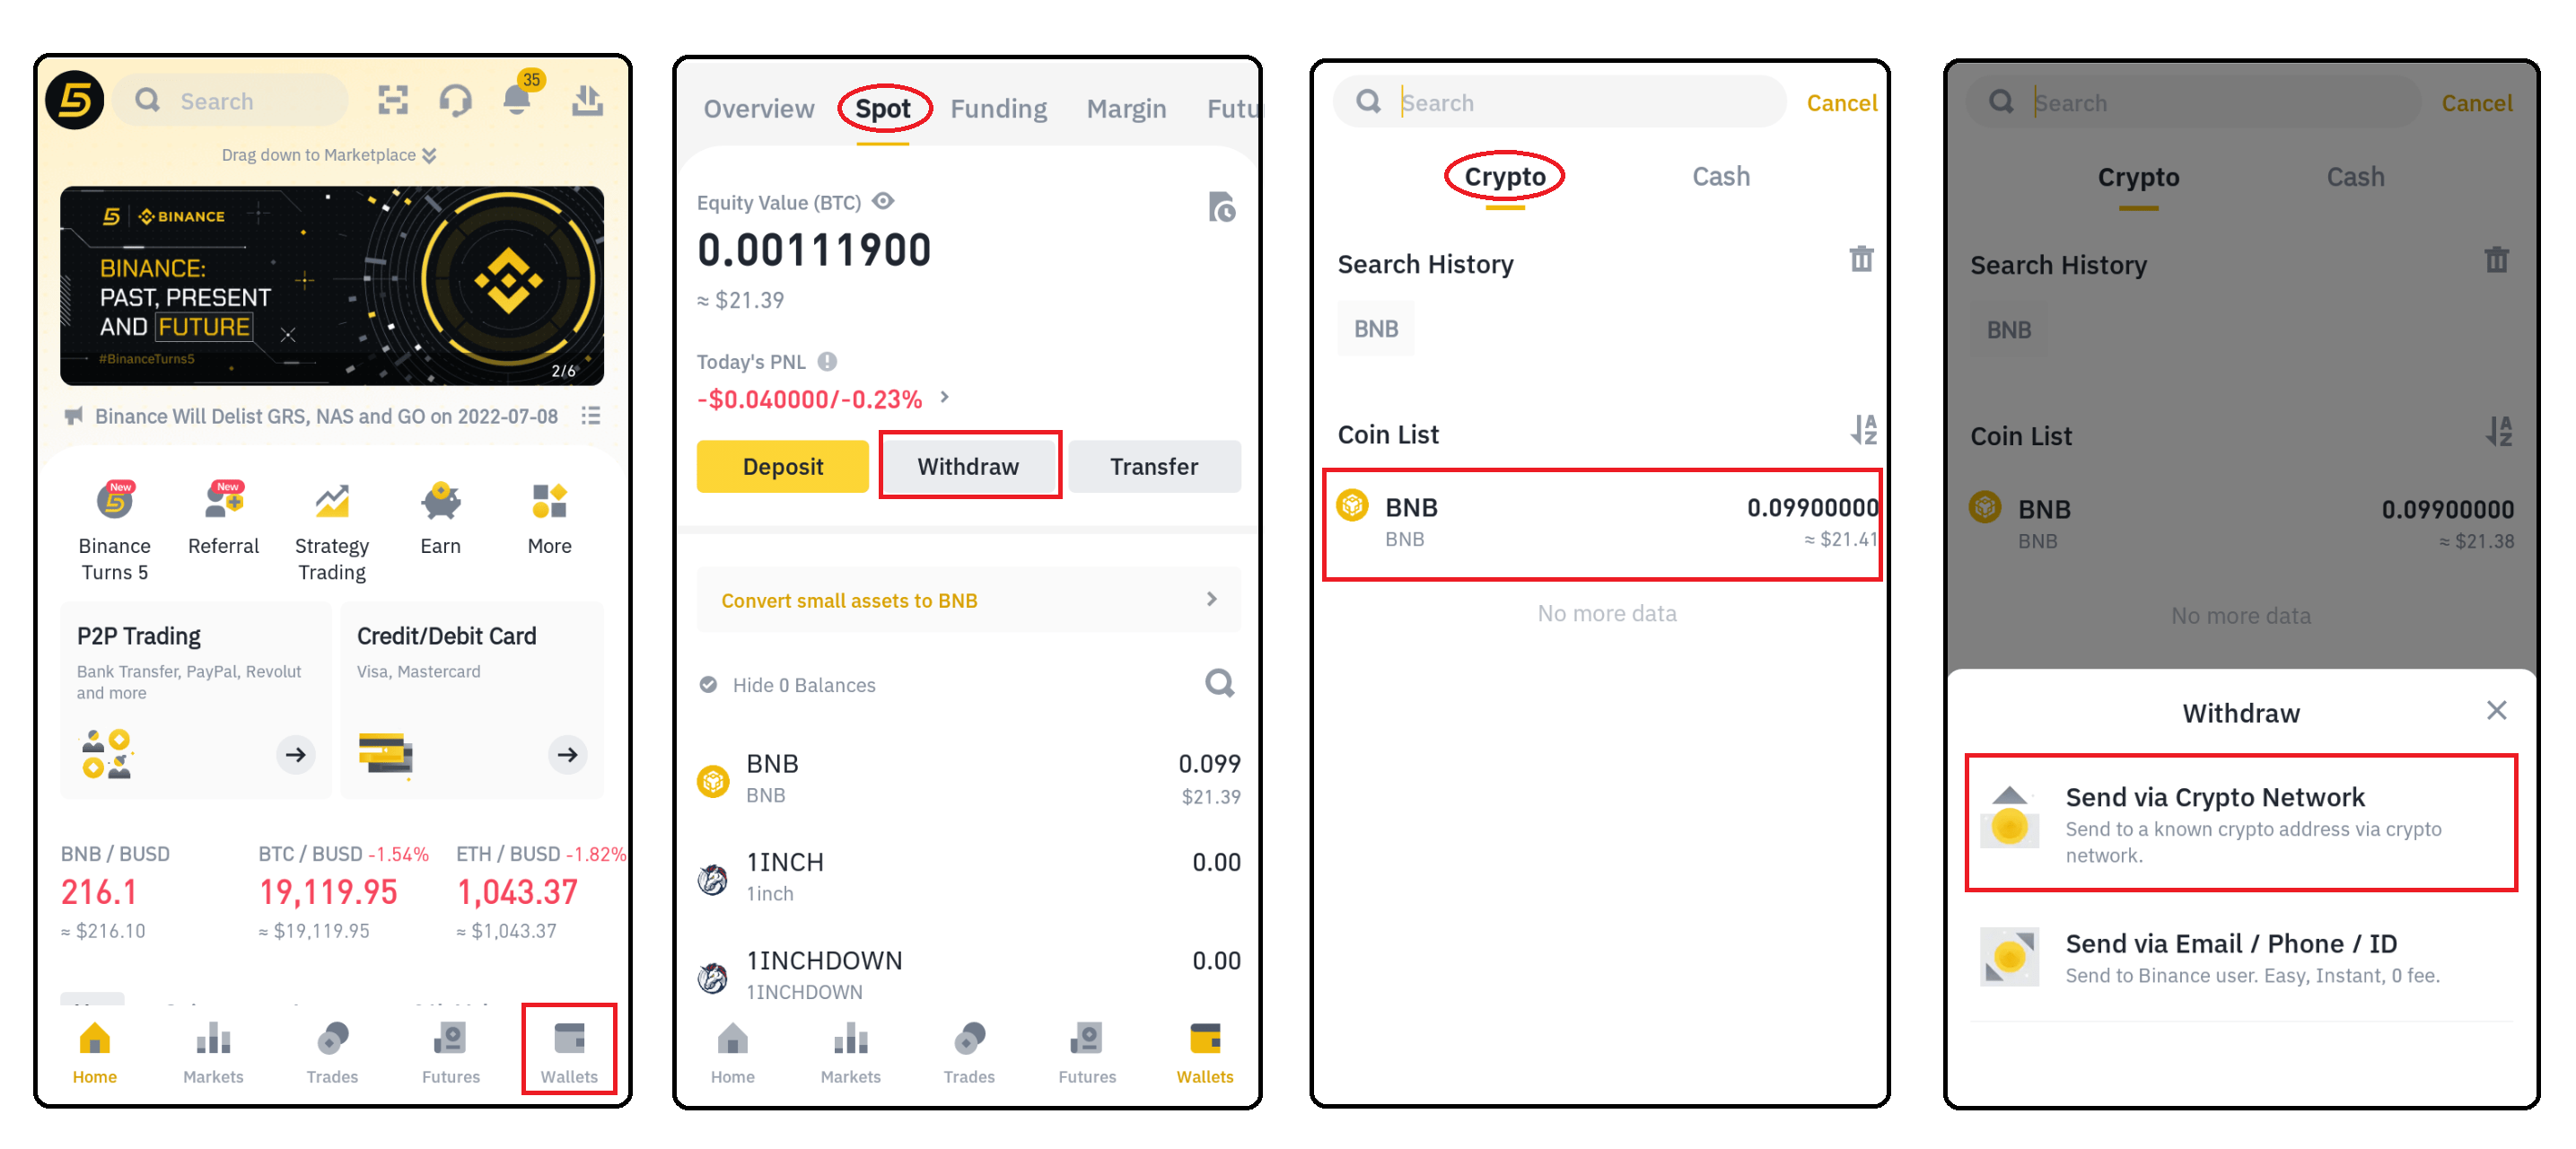 Click Wallets then Withdraw, choose type of crypto